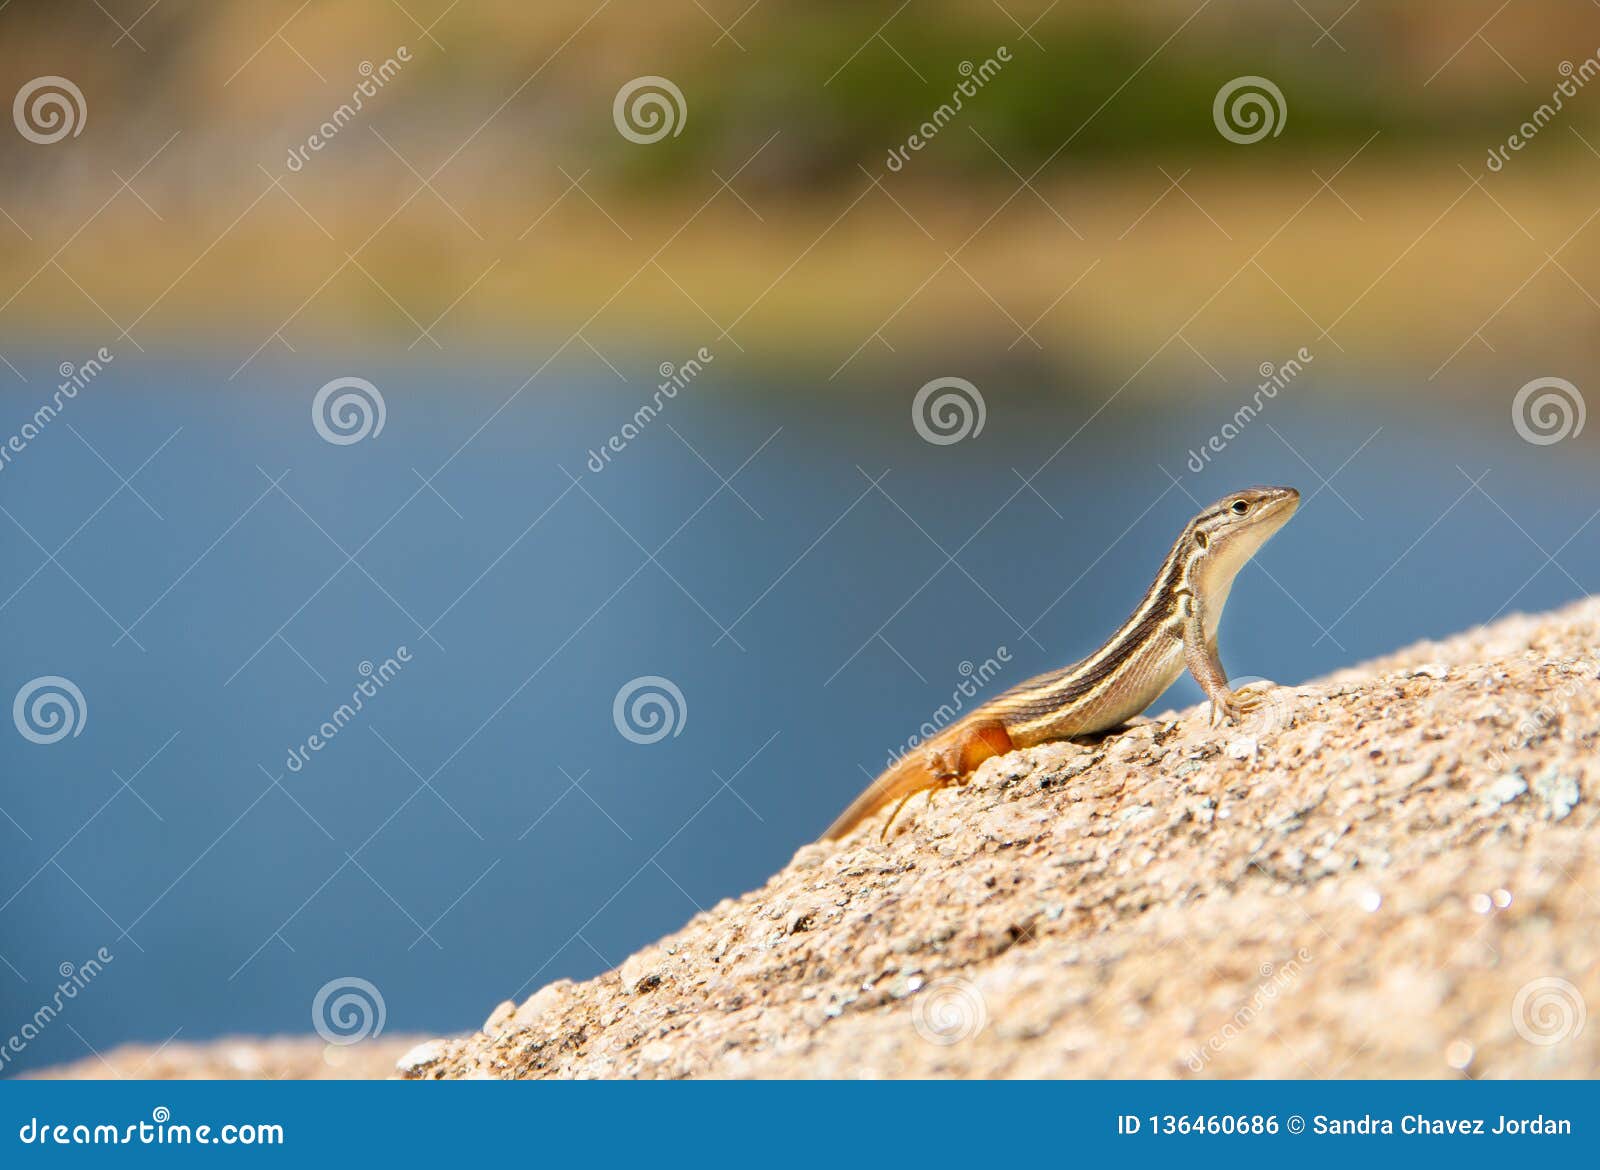 lizard look around and smiles while stands in a rock of desert